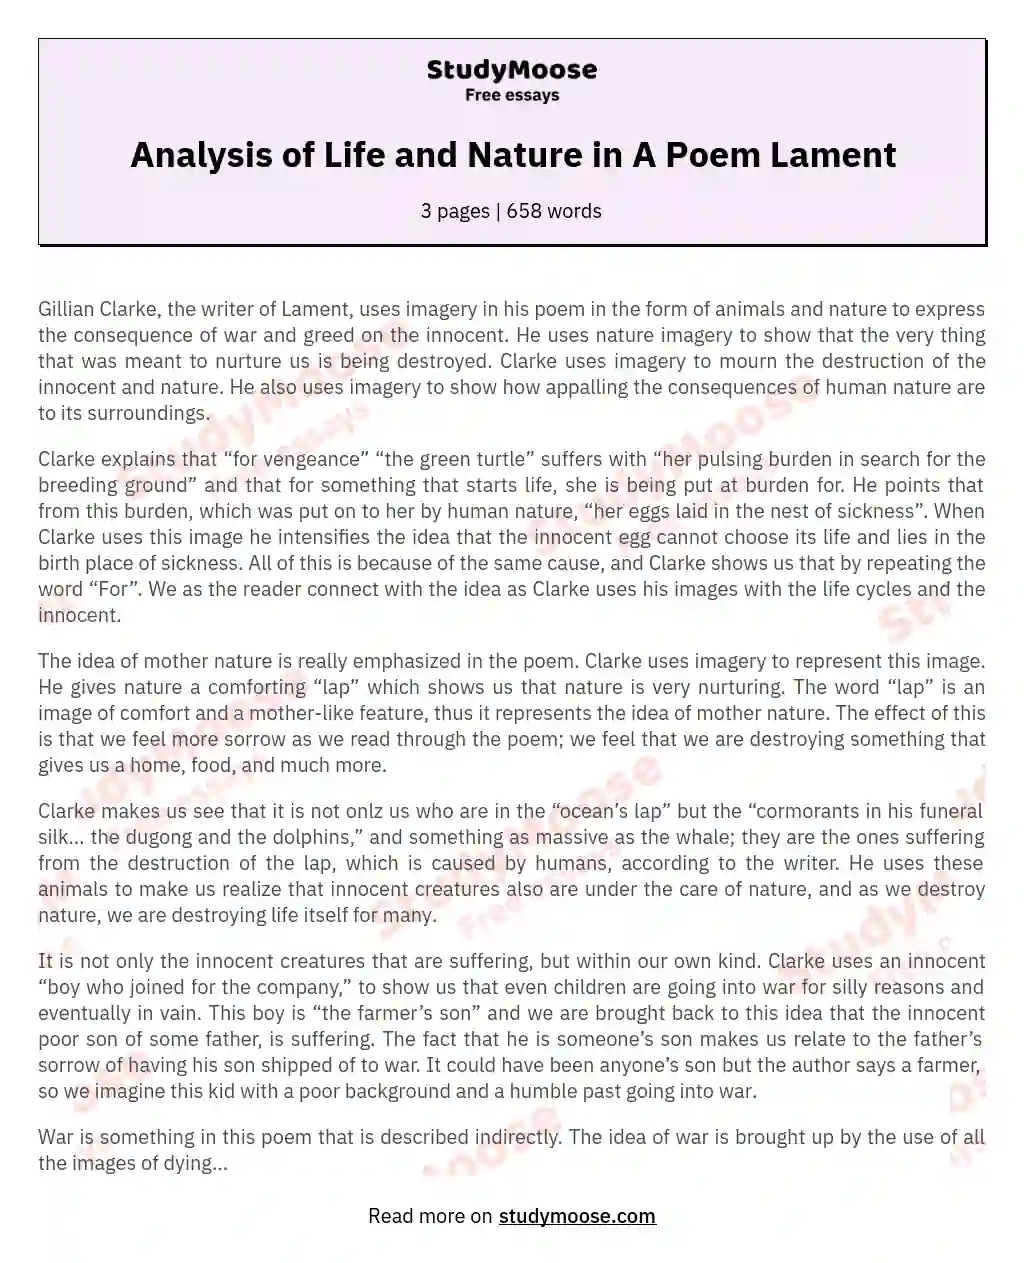 Analysis of Life and Nature in A Poem Lament essay